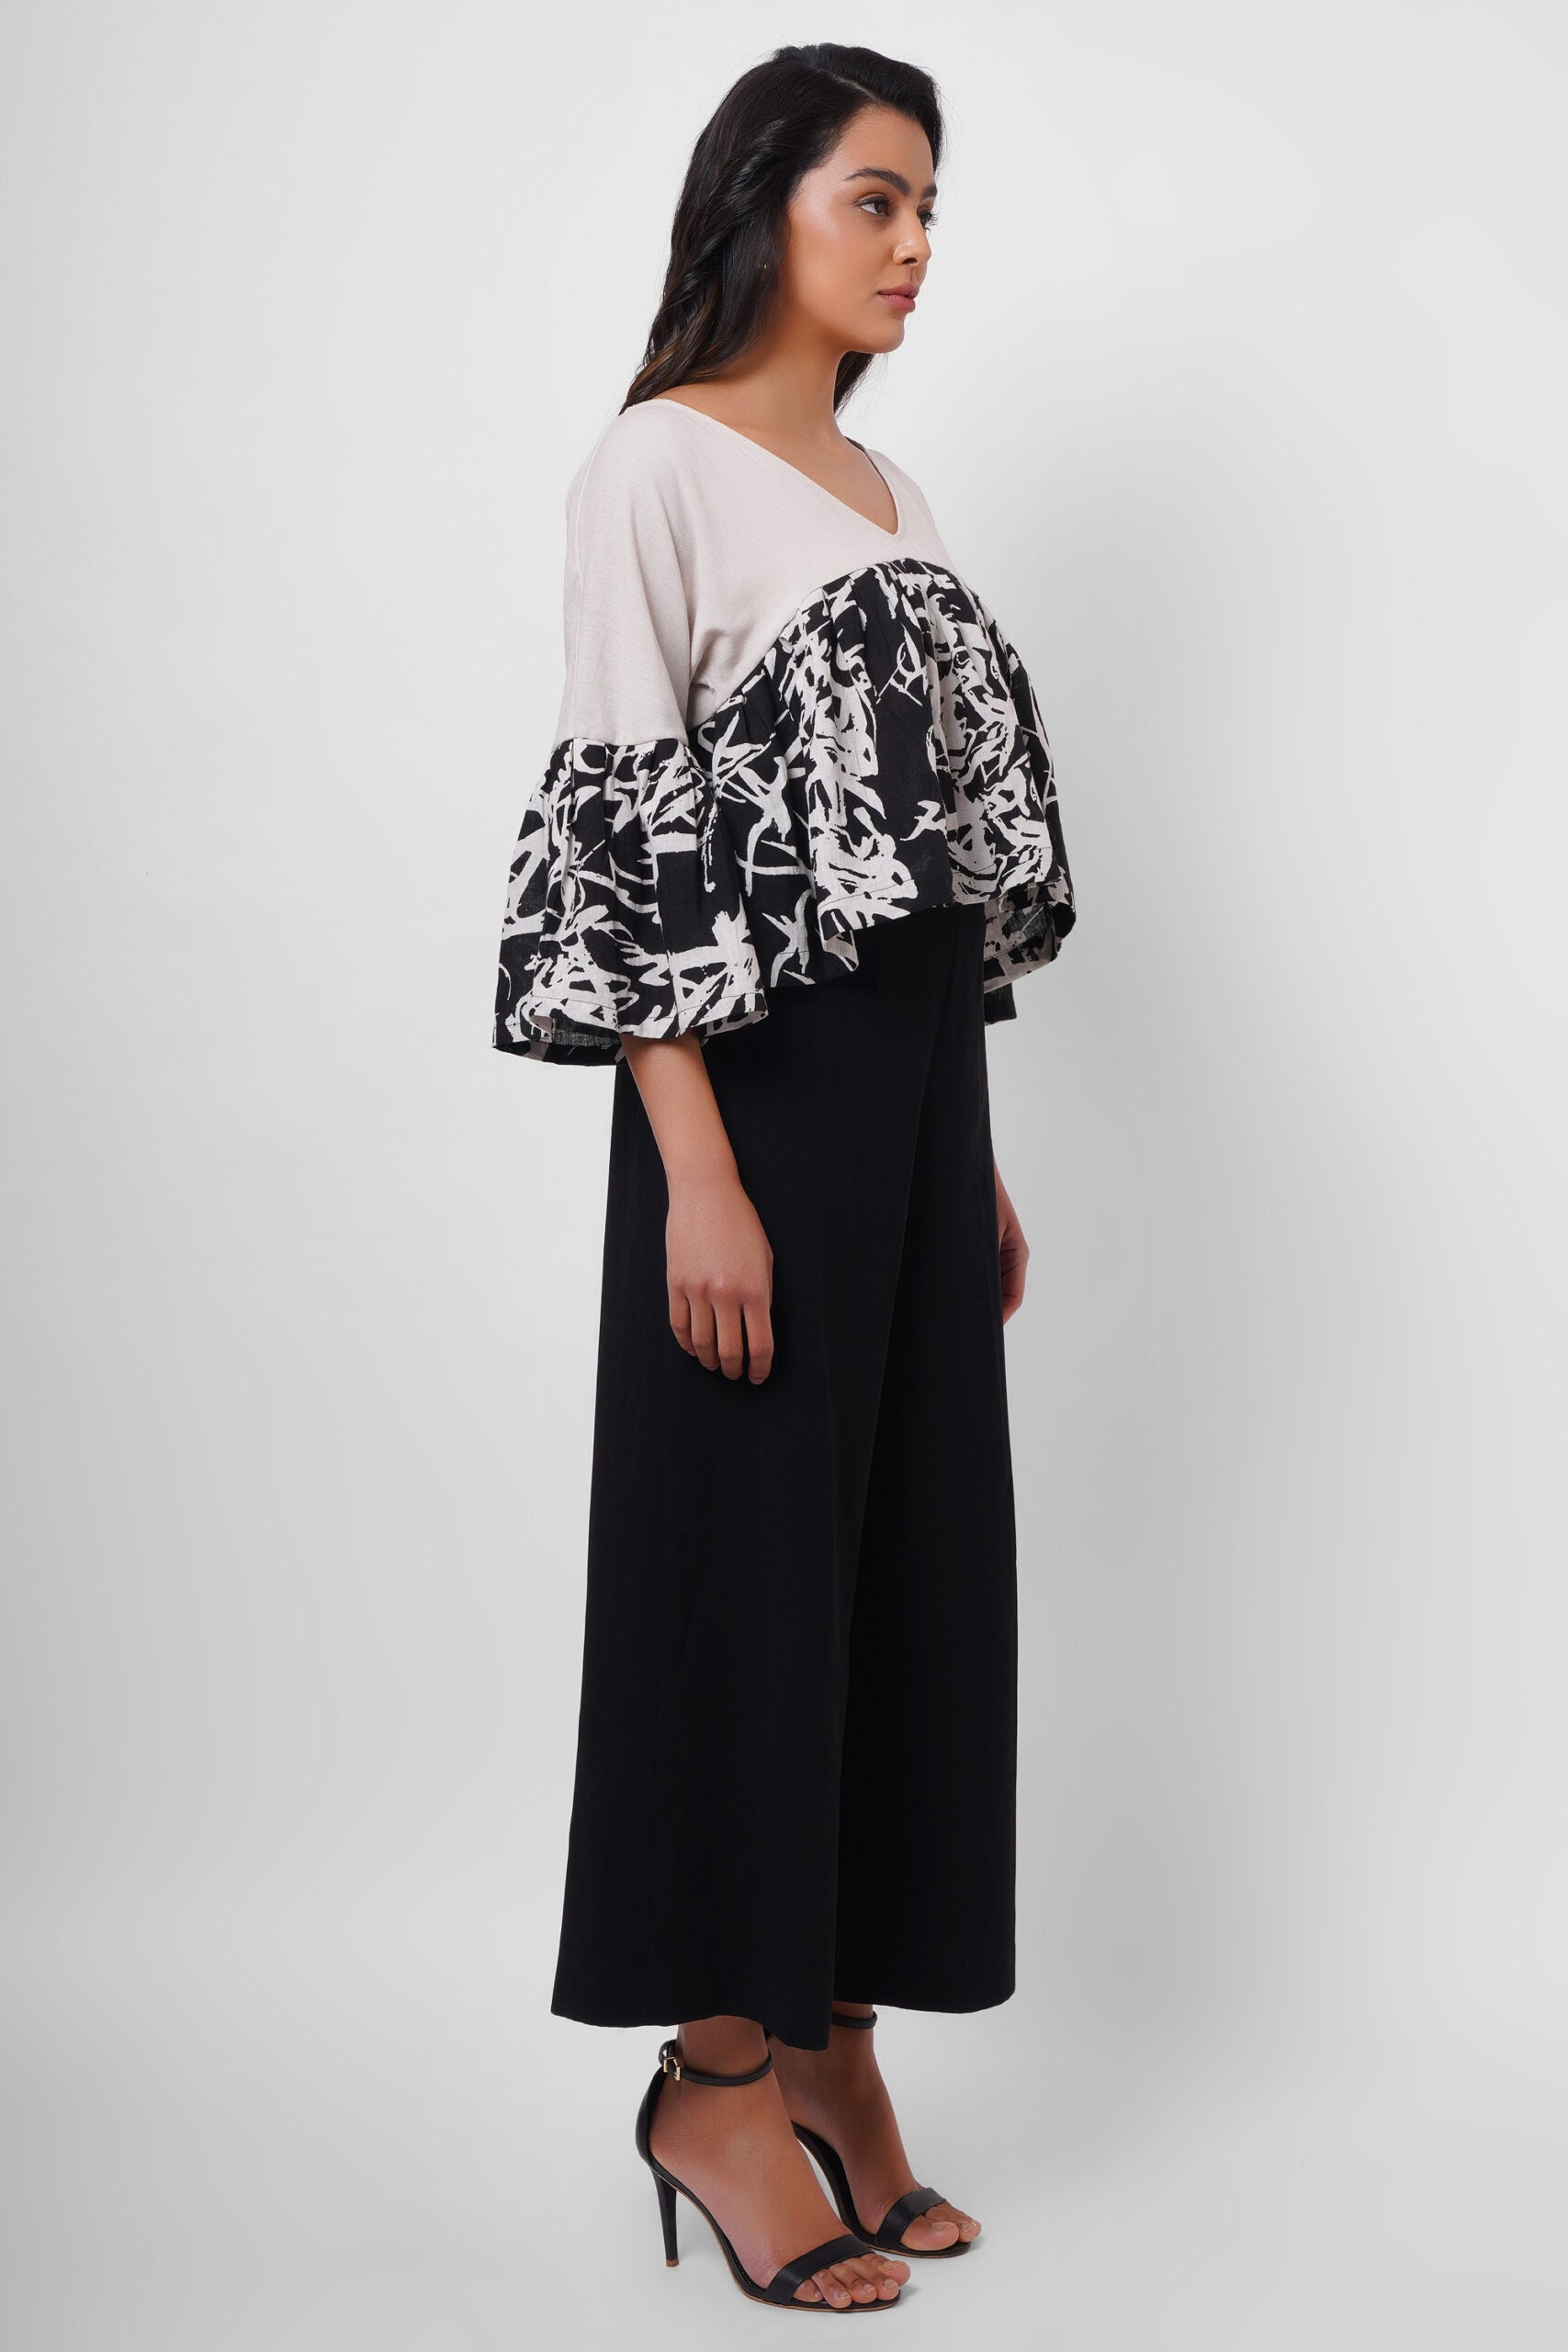 Black and White Linen Color Block Top - Western Era  Tops